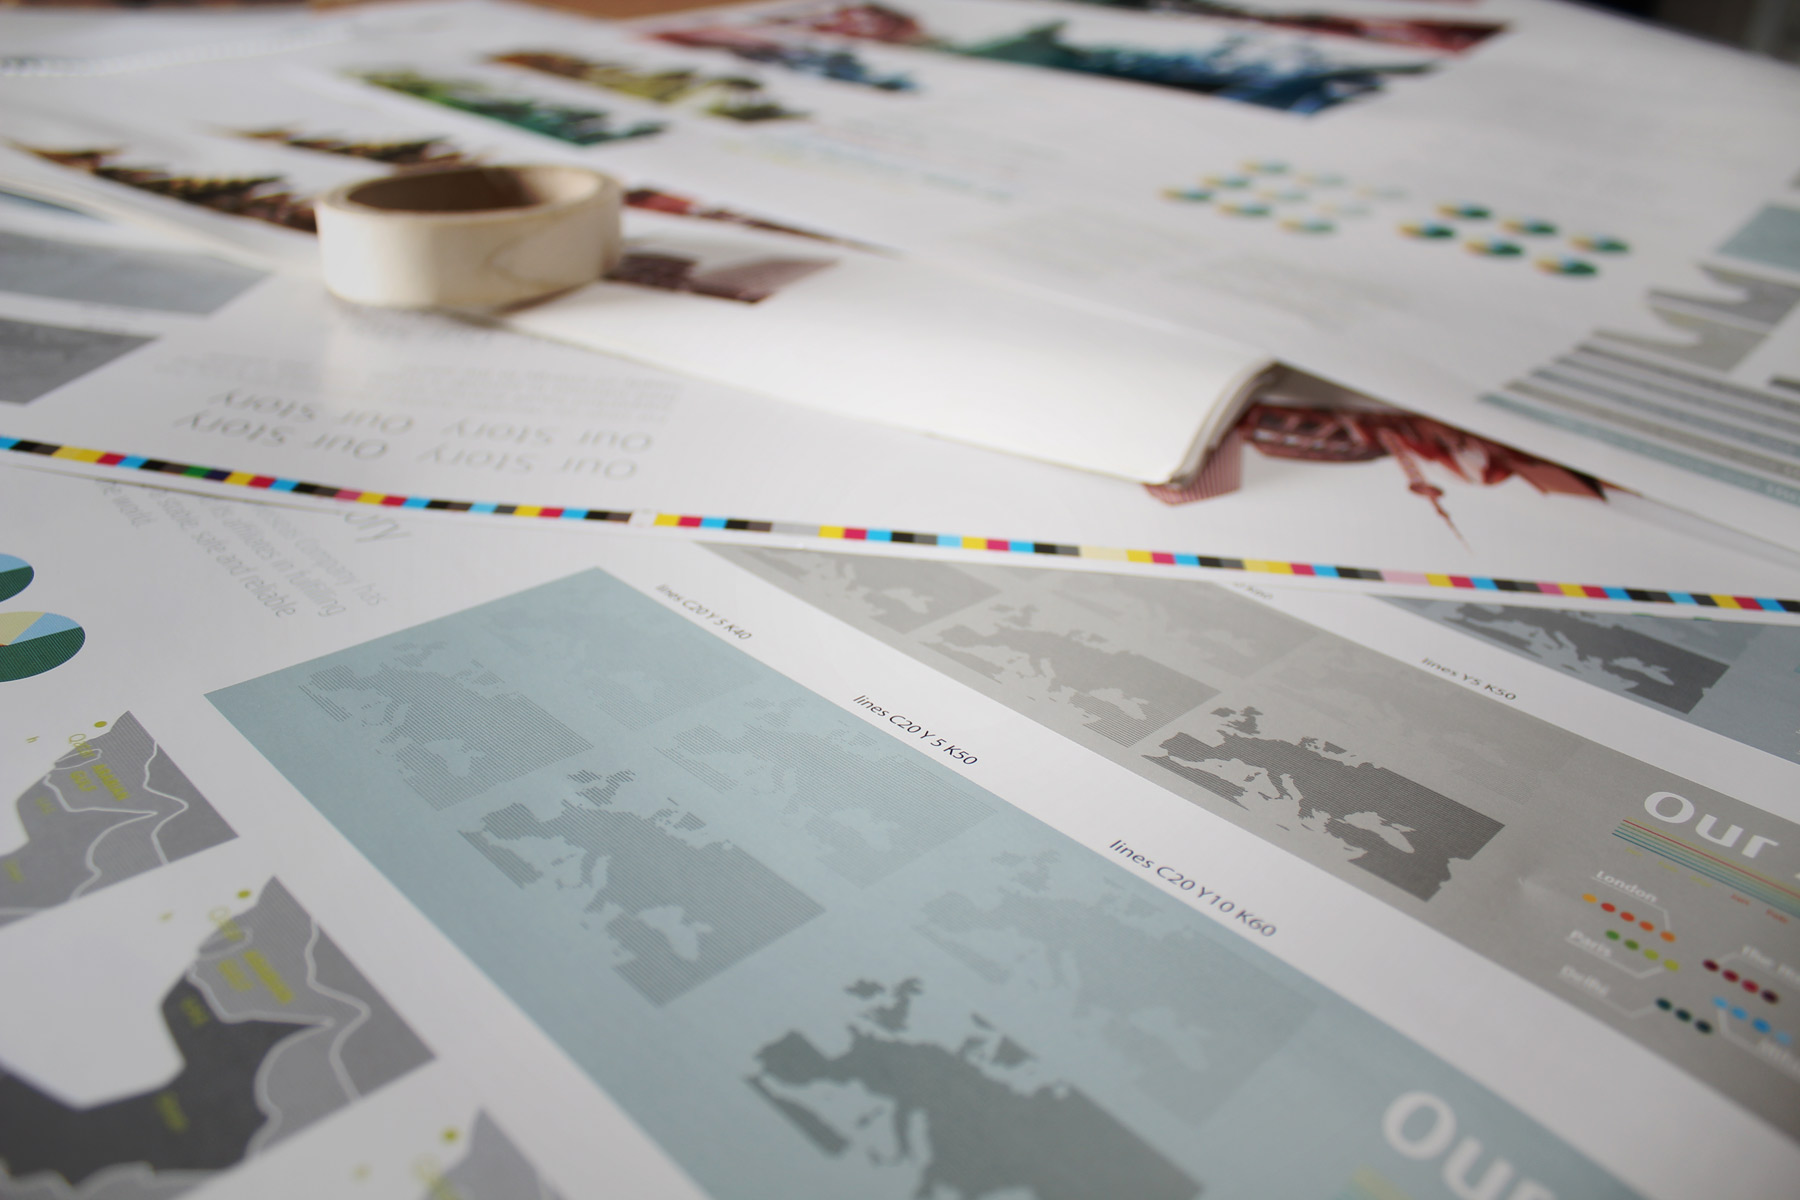 All content for the brochure was carefully wet proofed - A process whereby all print colours can be measured as if coming straight off the press - By using a proofing press.